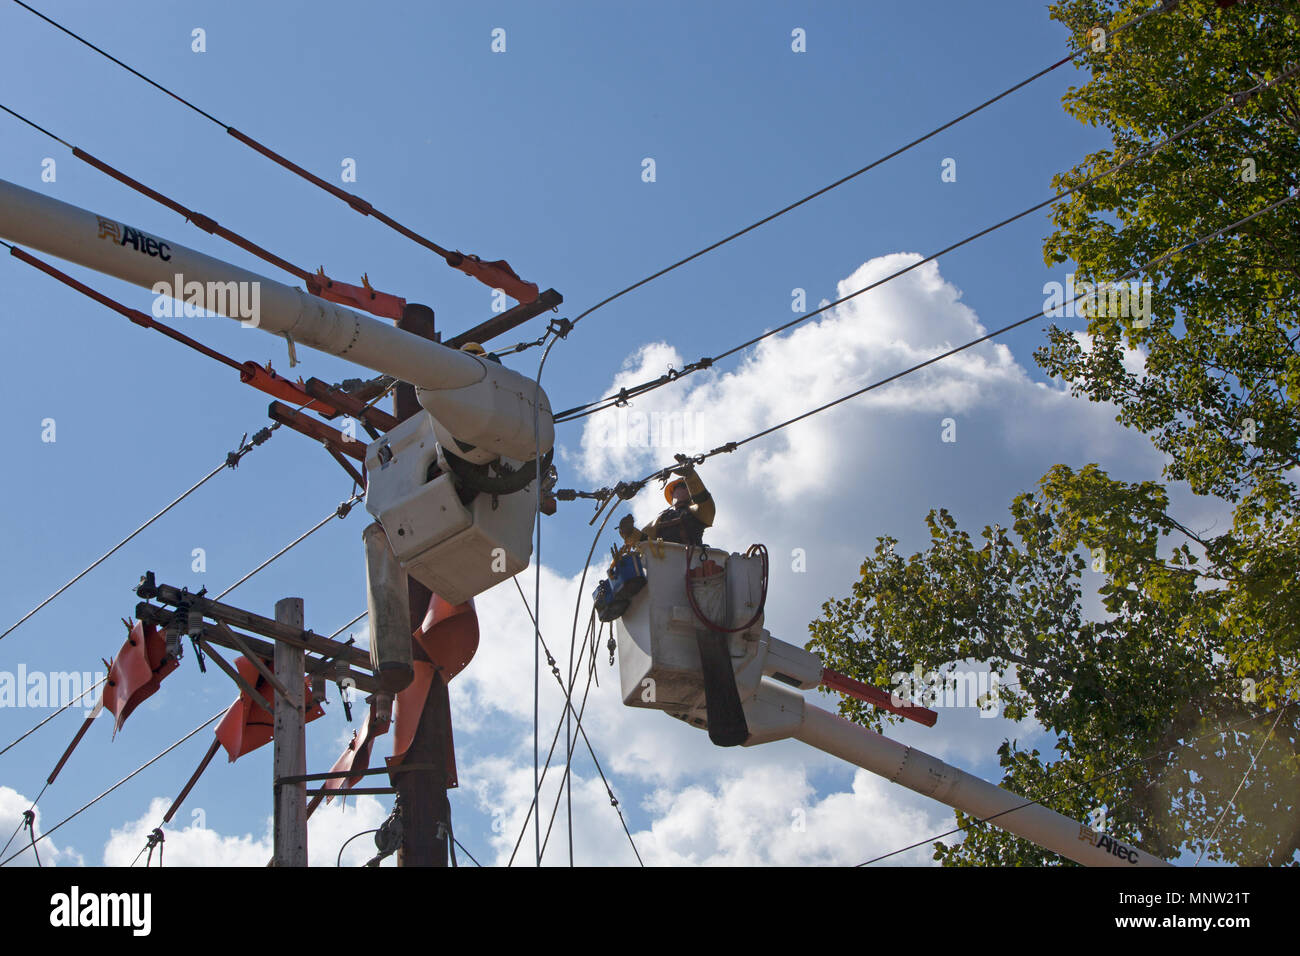 Workman using highlift bucket truck installing upgraded electrical service along a rural road in Vermont Stock Photo